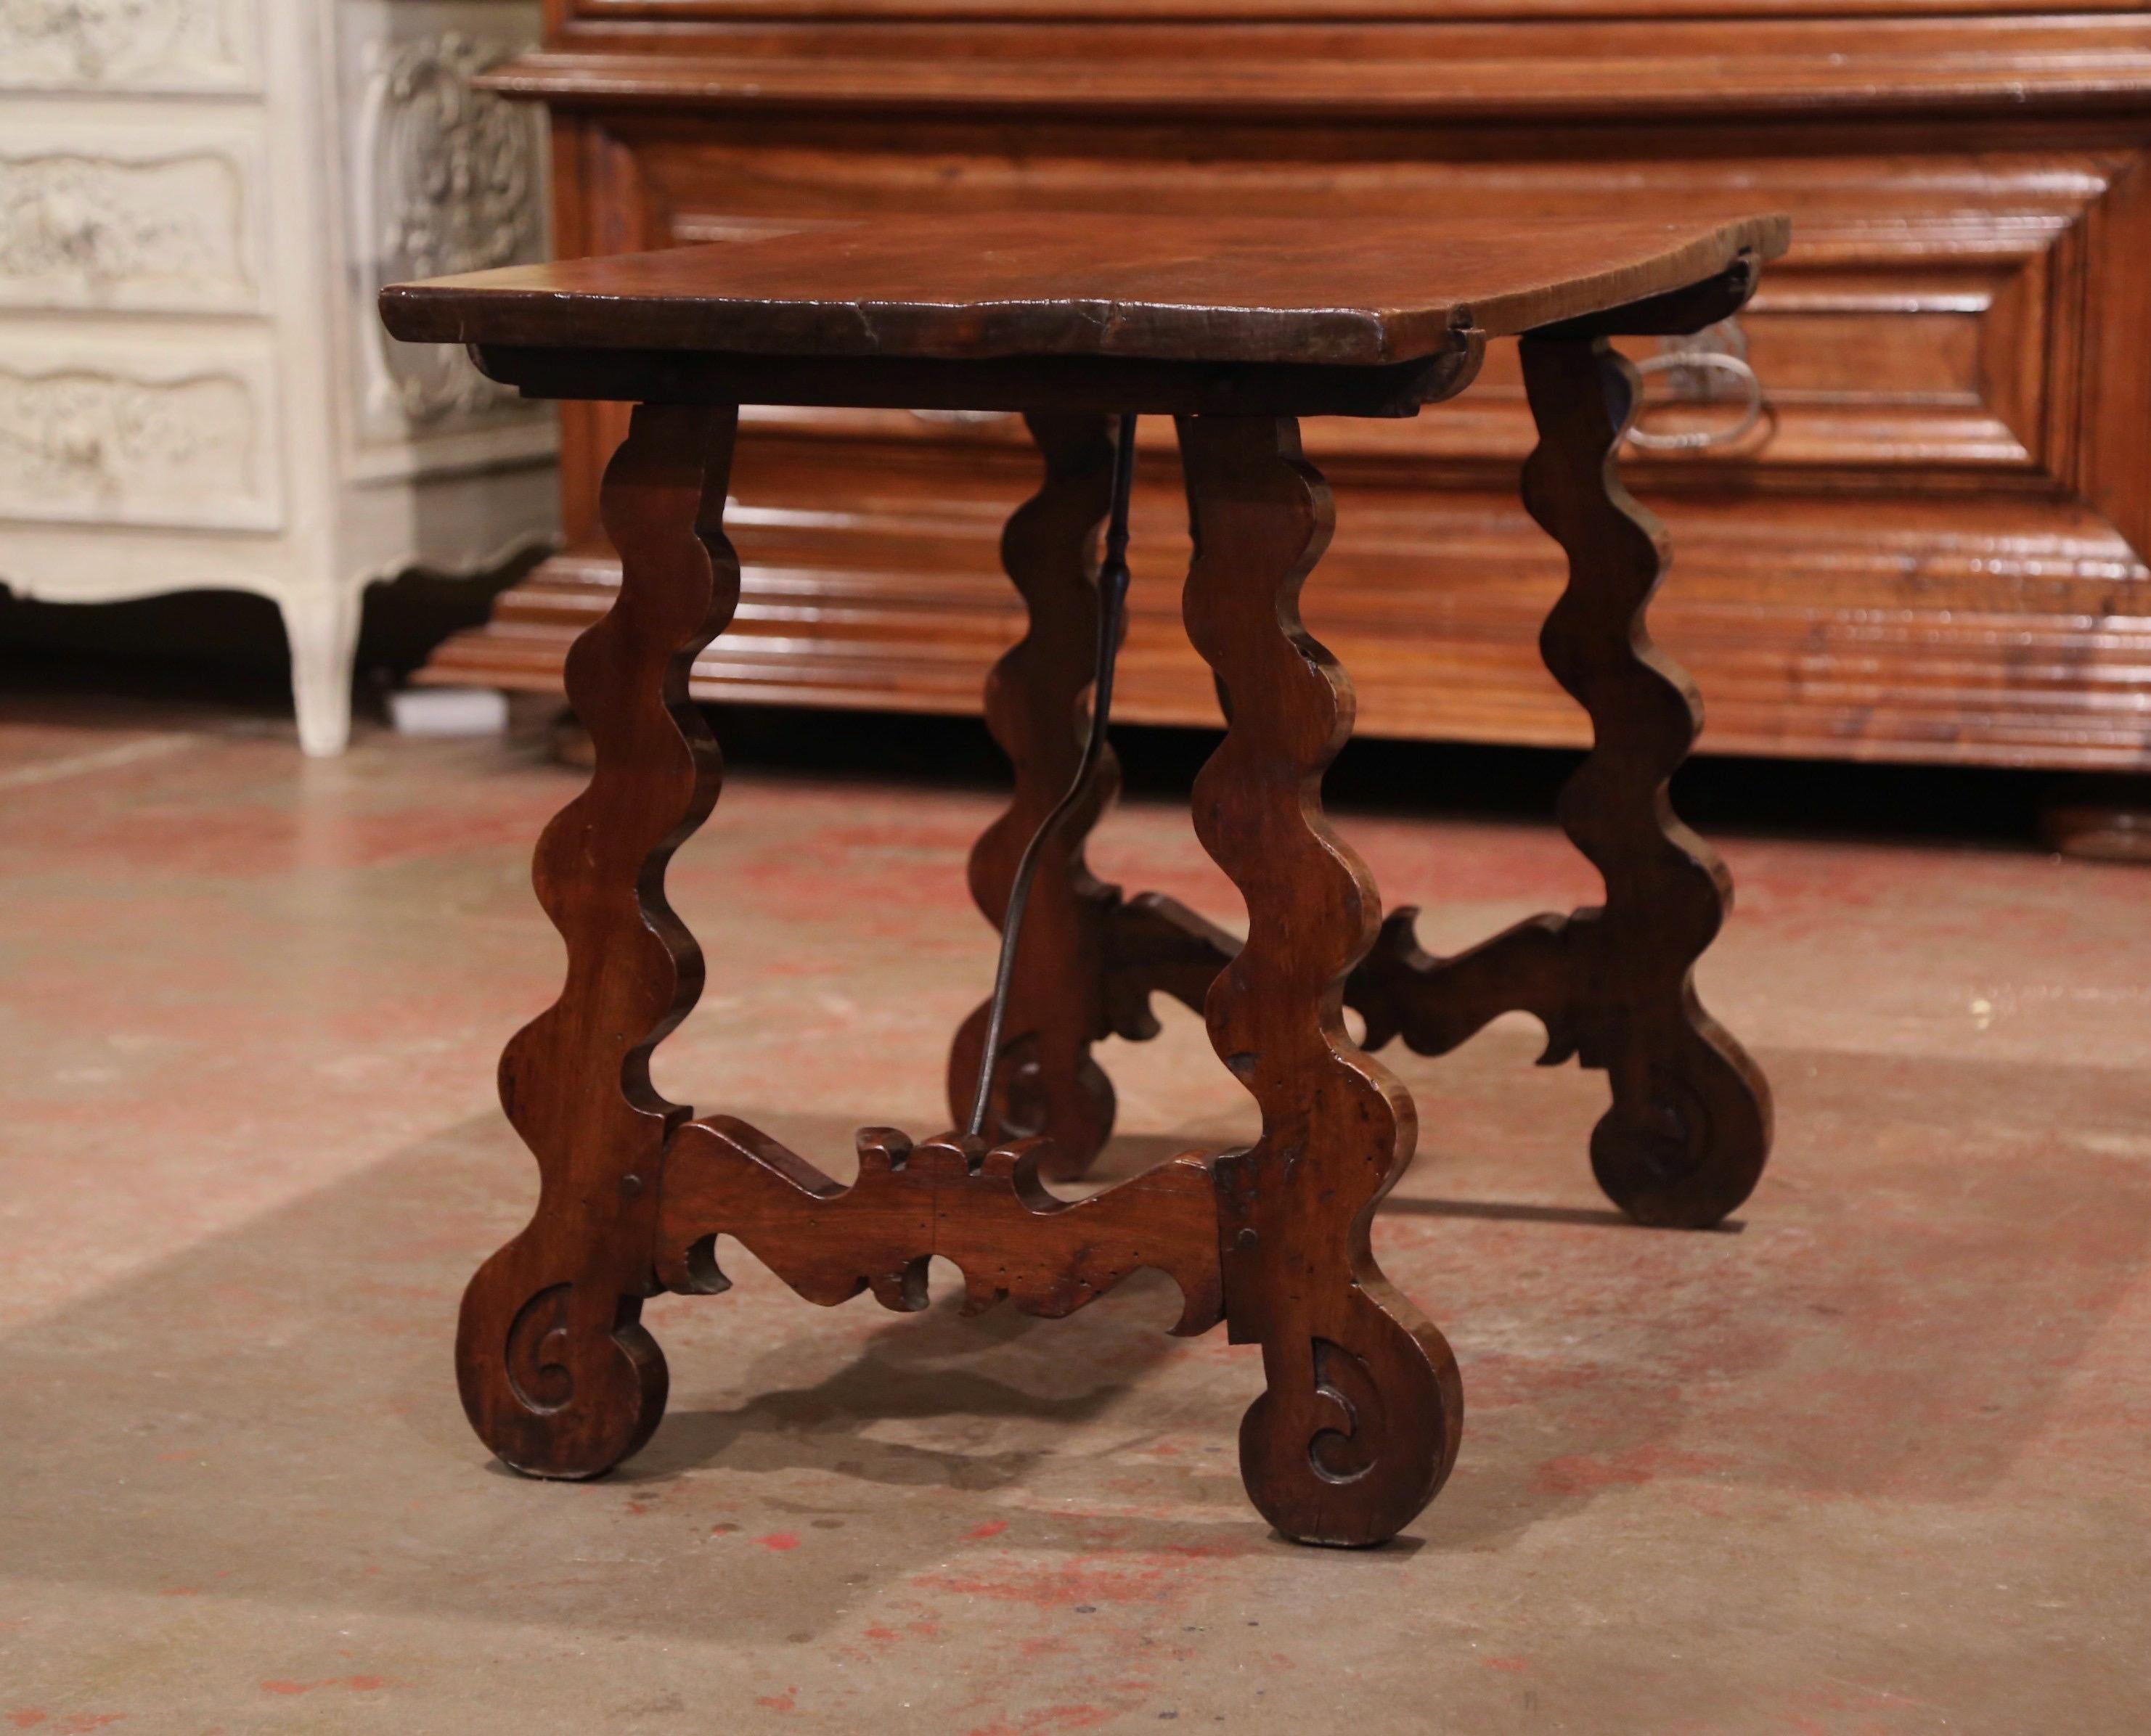 Hand-Carved 18th Century Spanish Carved Walnut Side Table with Wrought Iron Stretcher